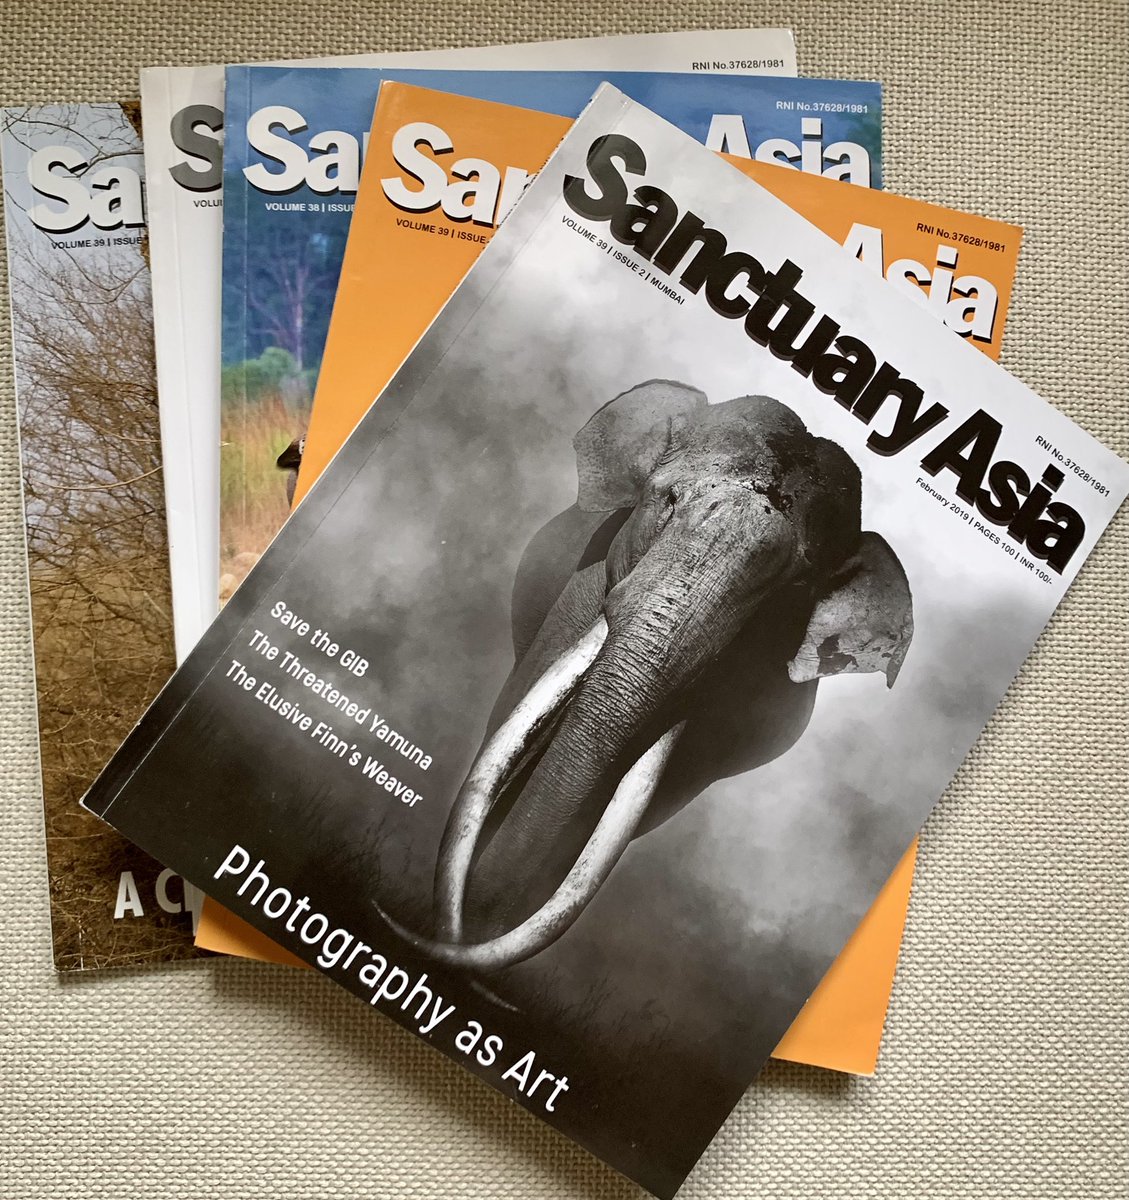 For more than 40 y, #sanctuaryasia has been d loved, revered, & unchallenged record of #naturewriting in #india. We talk about d material or intellectual contributions of great #institutions in nation building. This is a #magazine that is one such!